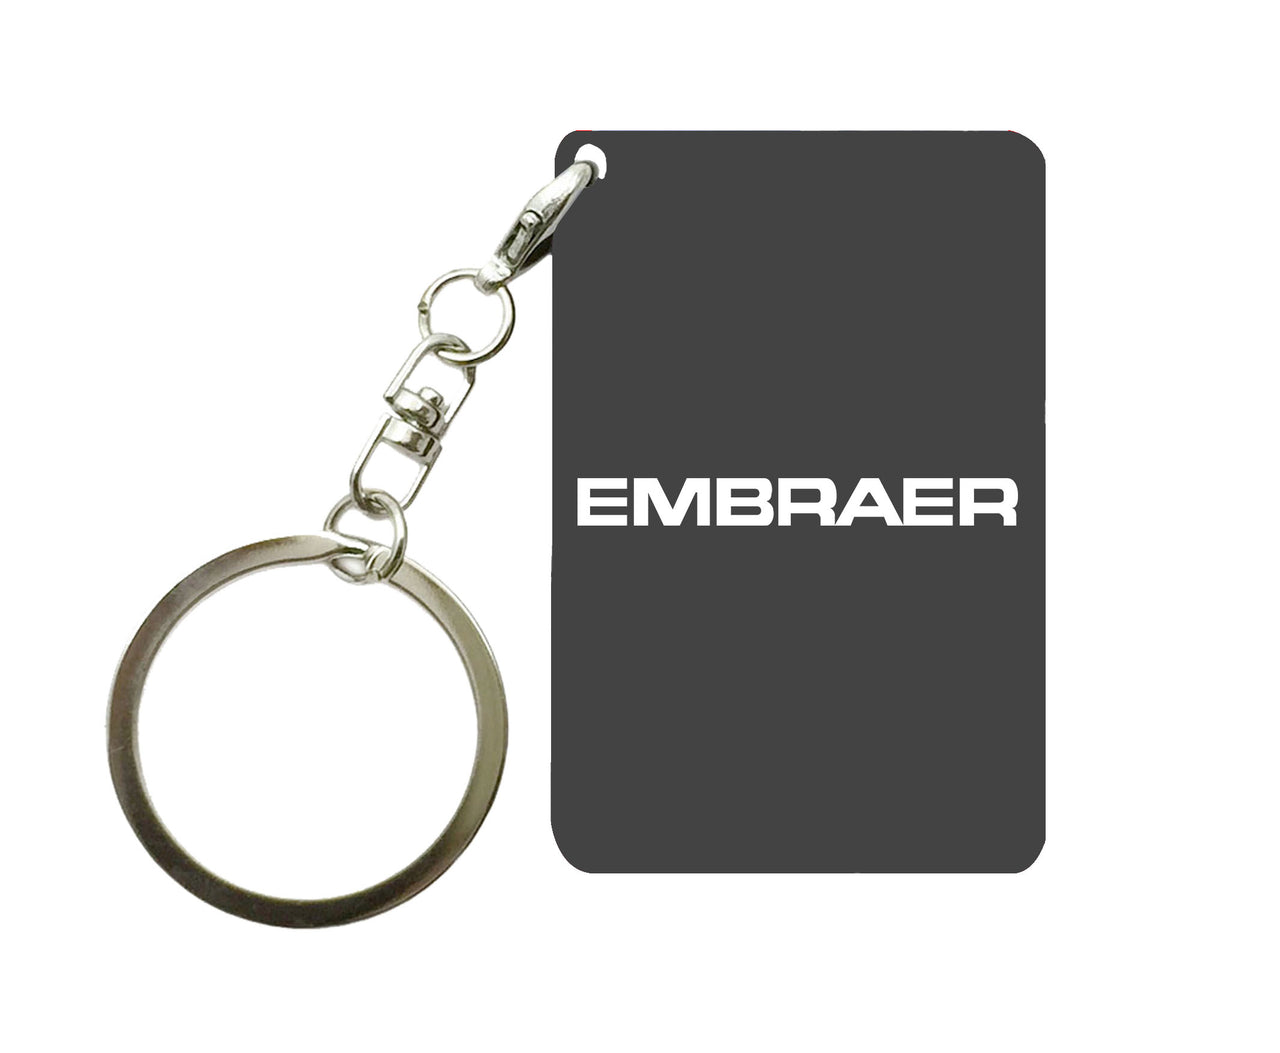 Embraer & Text Designed Key Chains